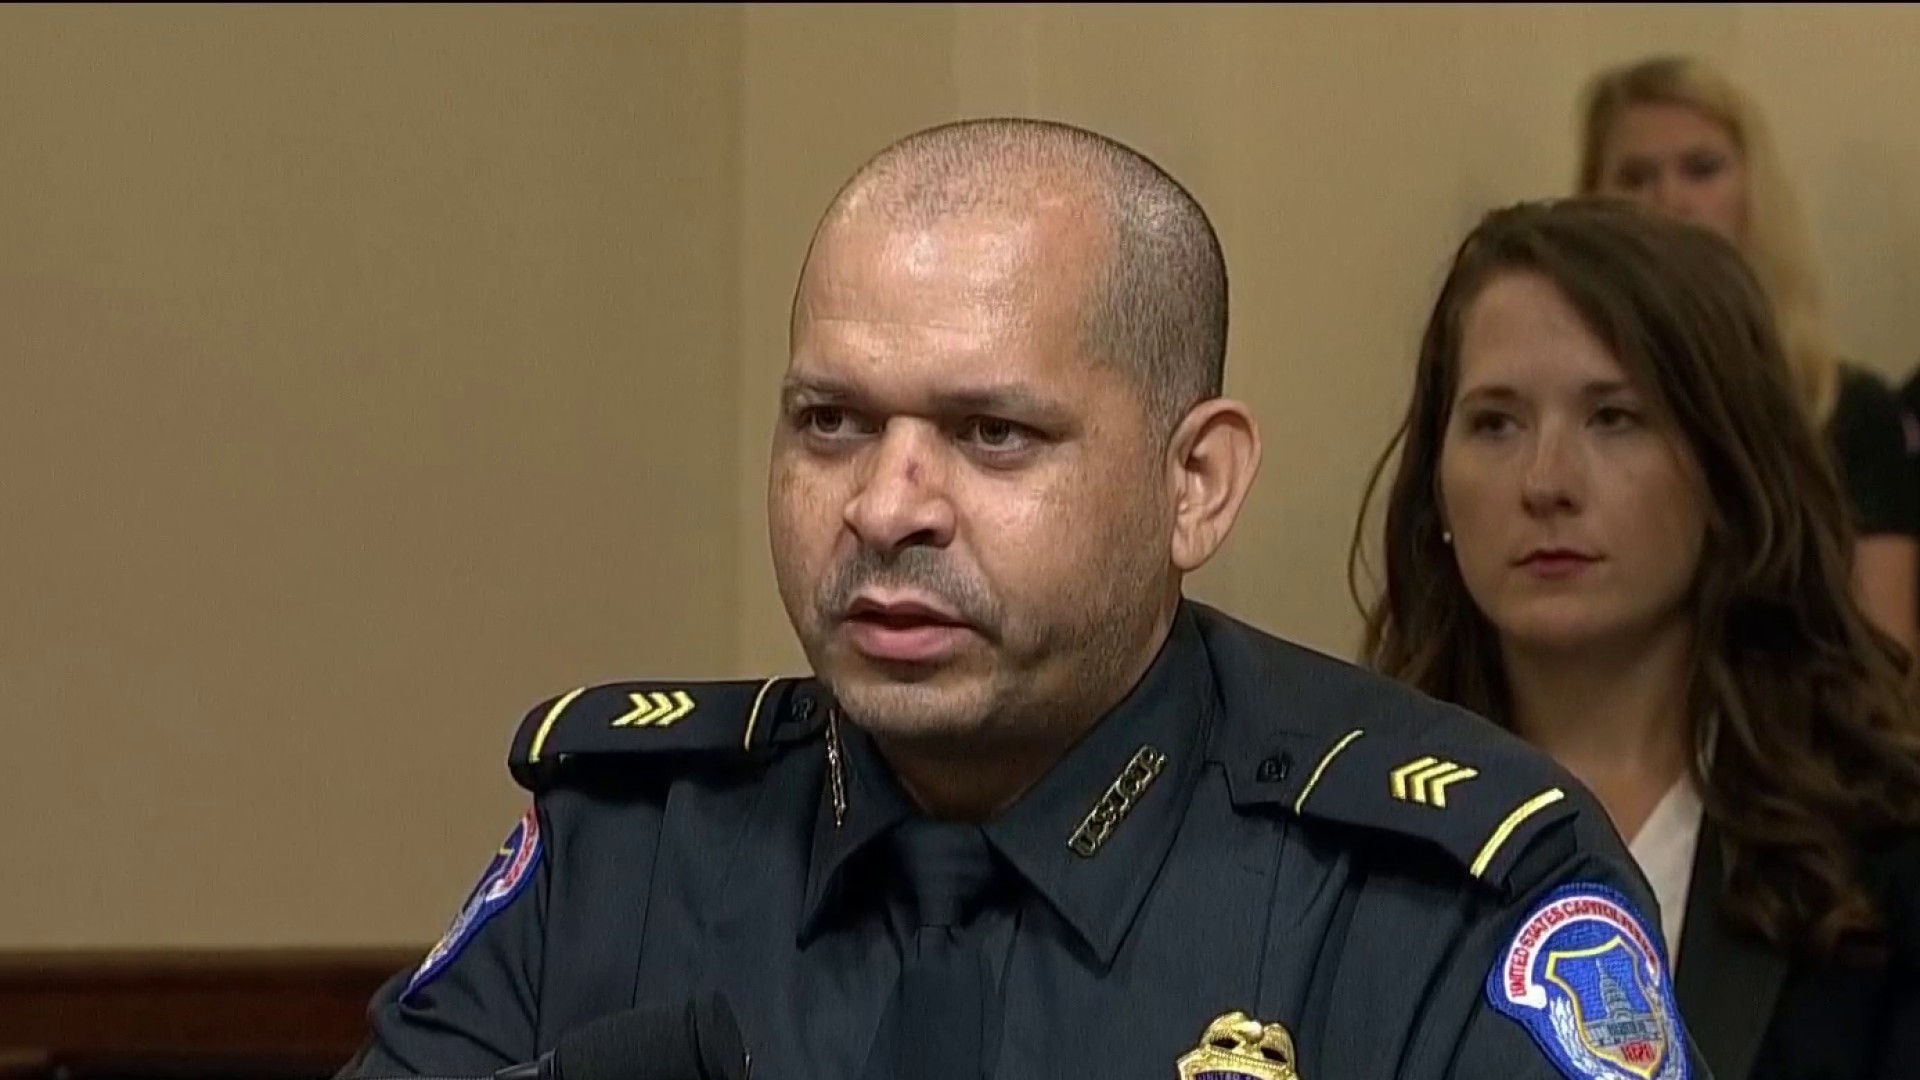 Sgt. Gonell Characterizes Capitol Riot As An ‘Attempted Coup’